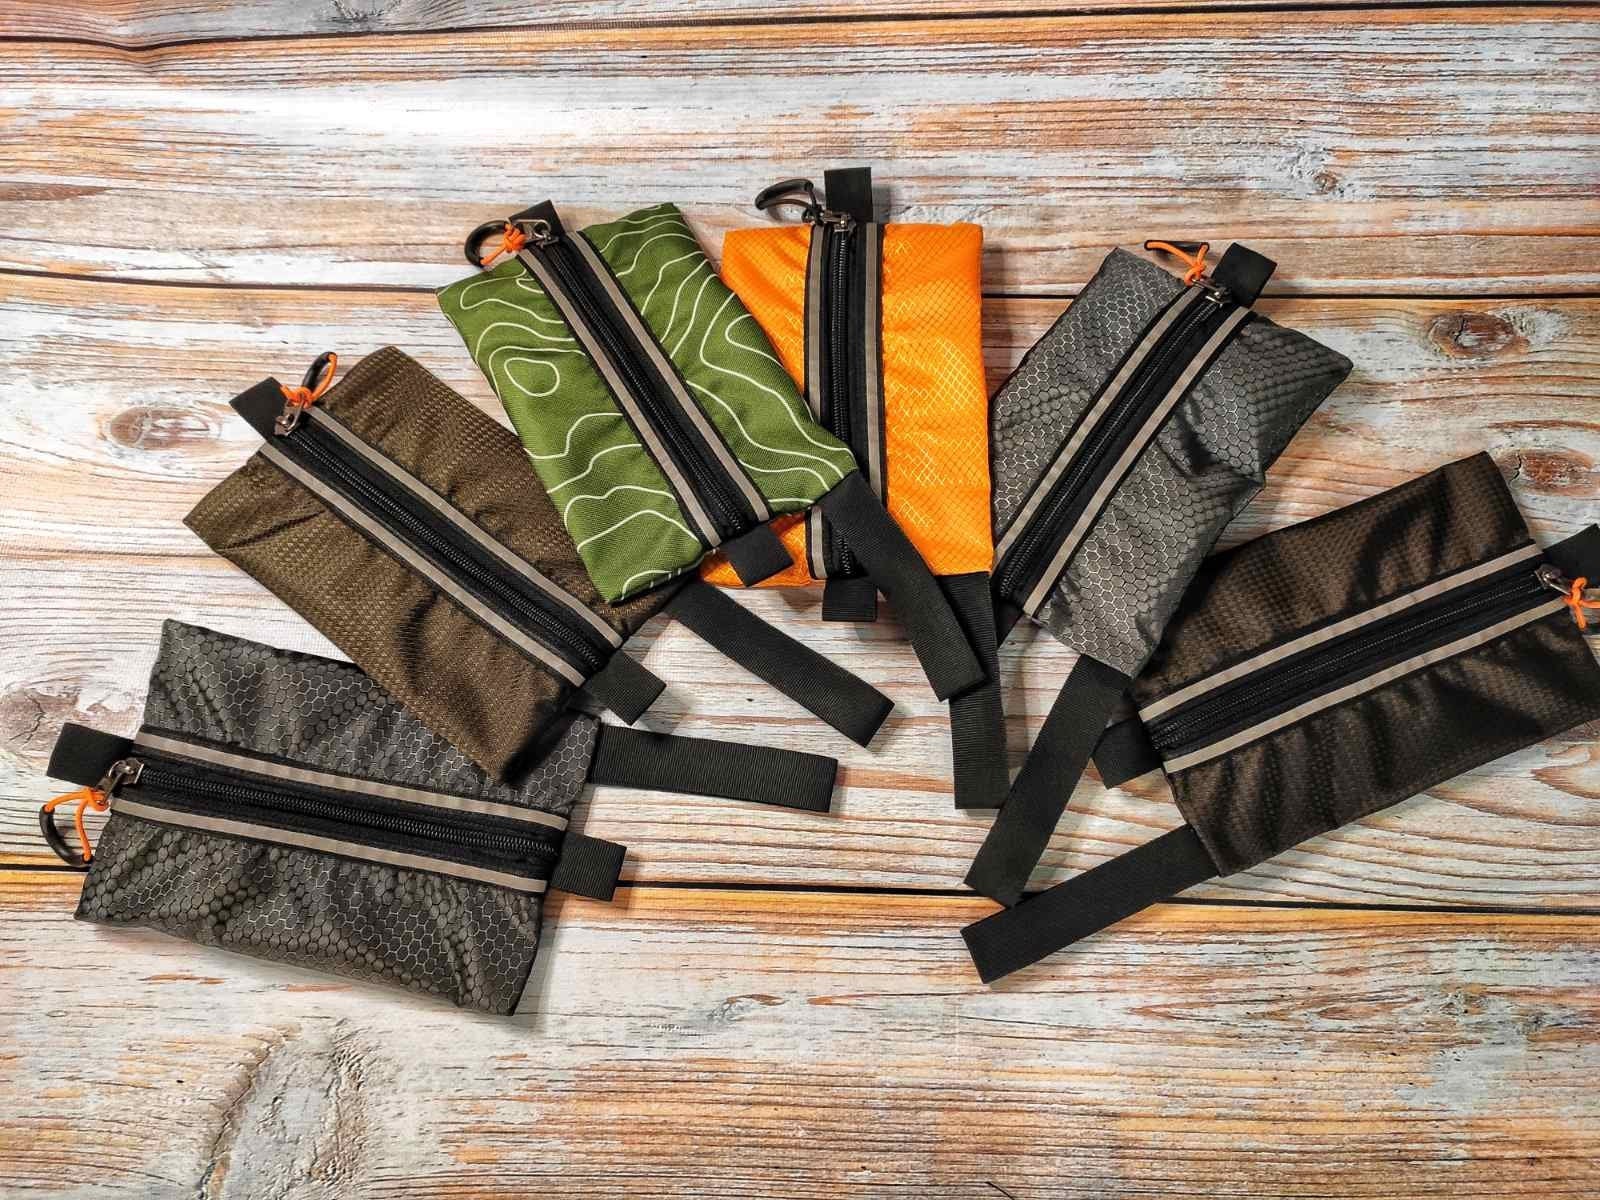  INOOMP Survival Supplies Pouch Camping Multitool Men Fanny Pack  Edc Tool Belt Bag Oxford Cloth Change Card Camouflage Mens Fanny Pack Molle  Accessories Hiking Waist Bag